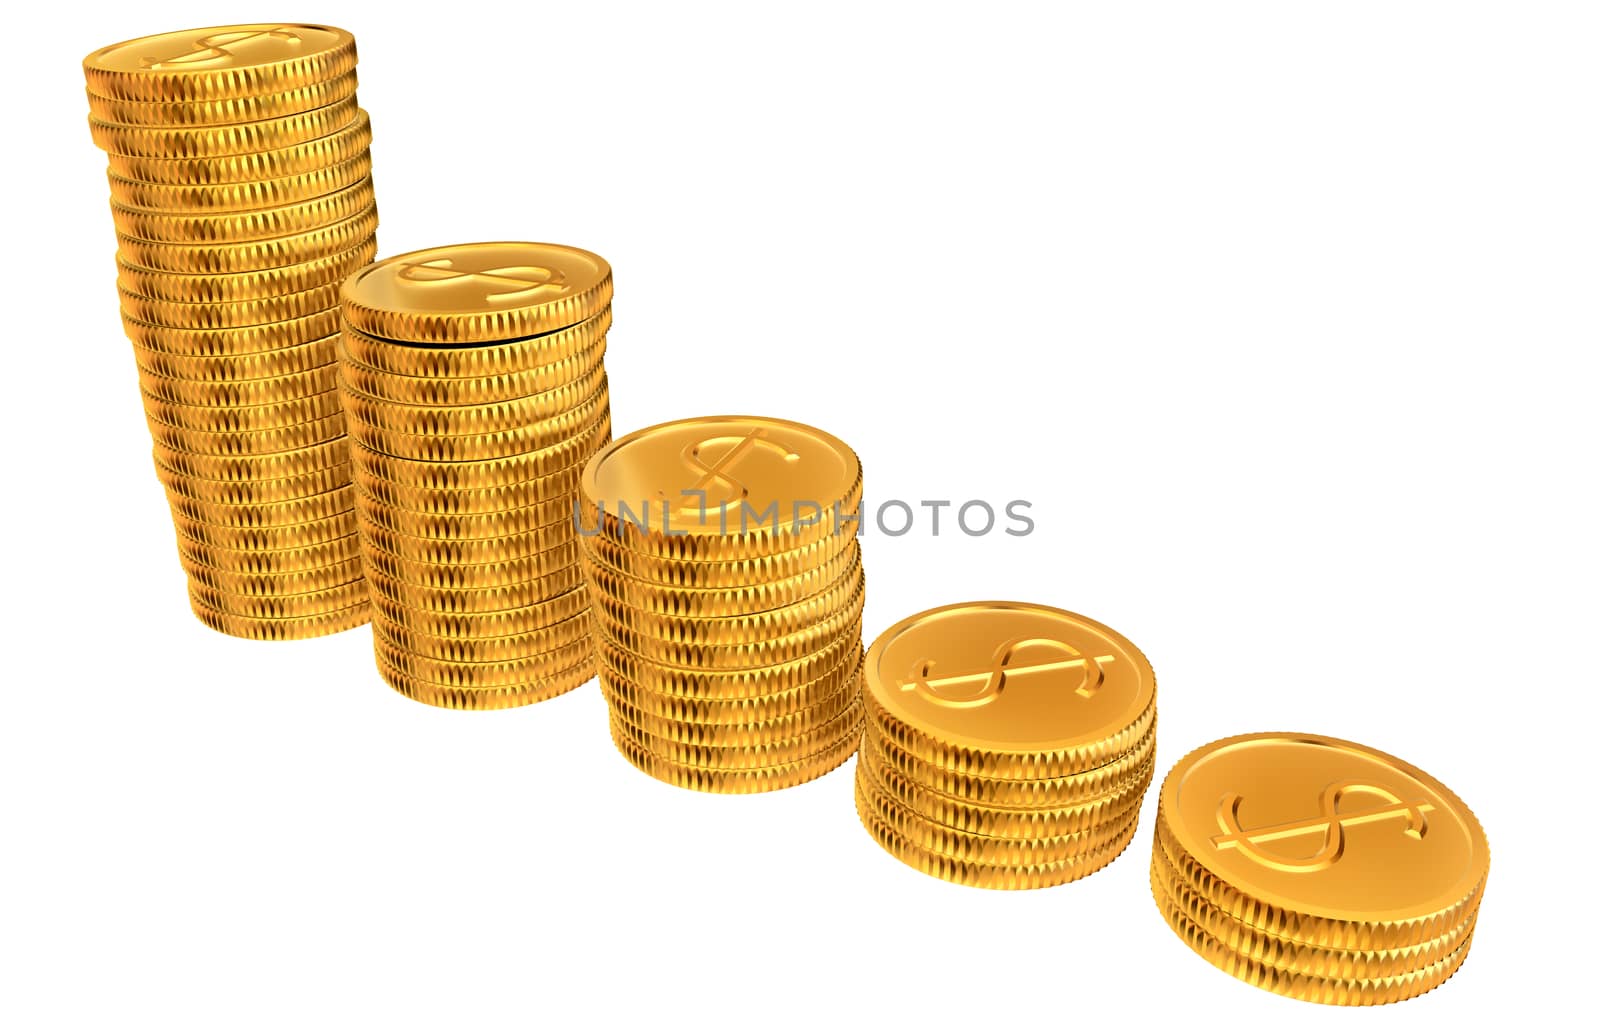 Stacks of gold dollar coins by merzavka